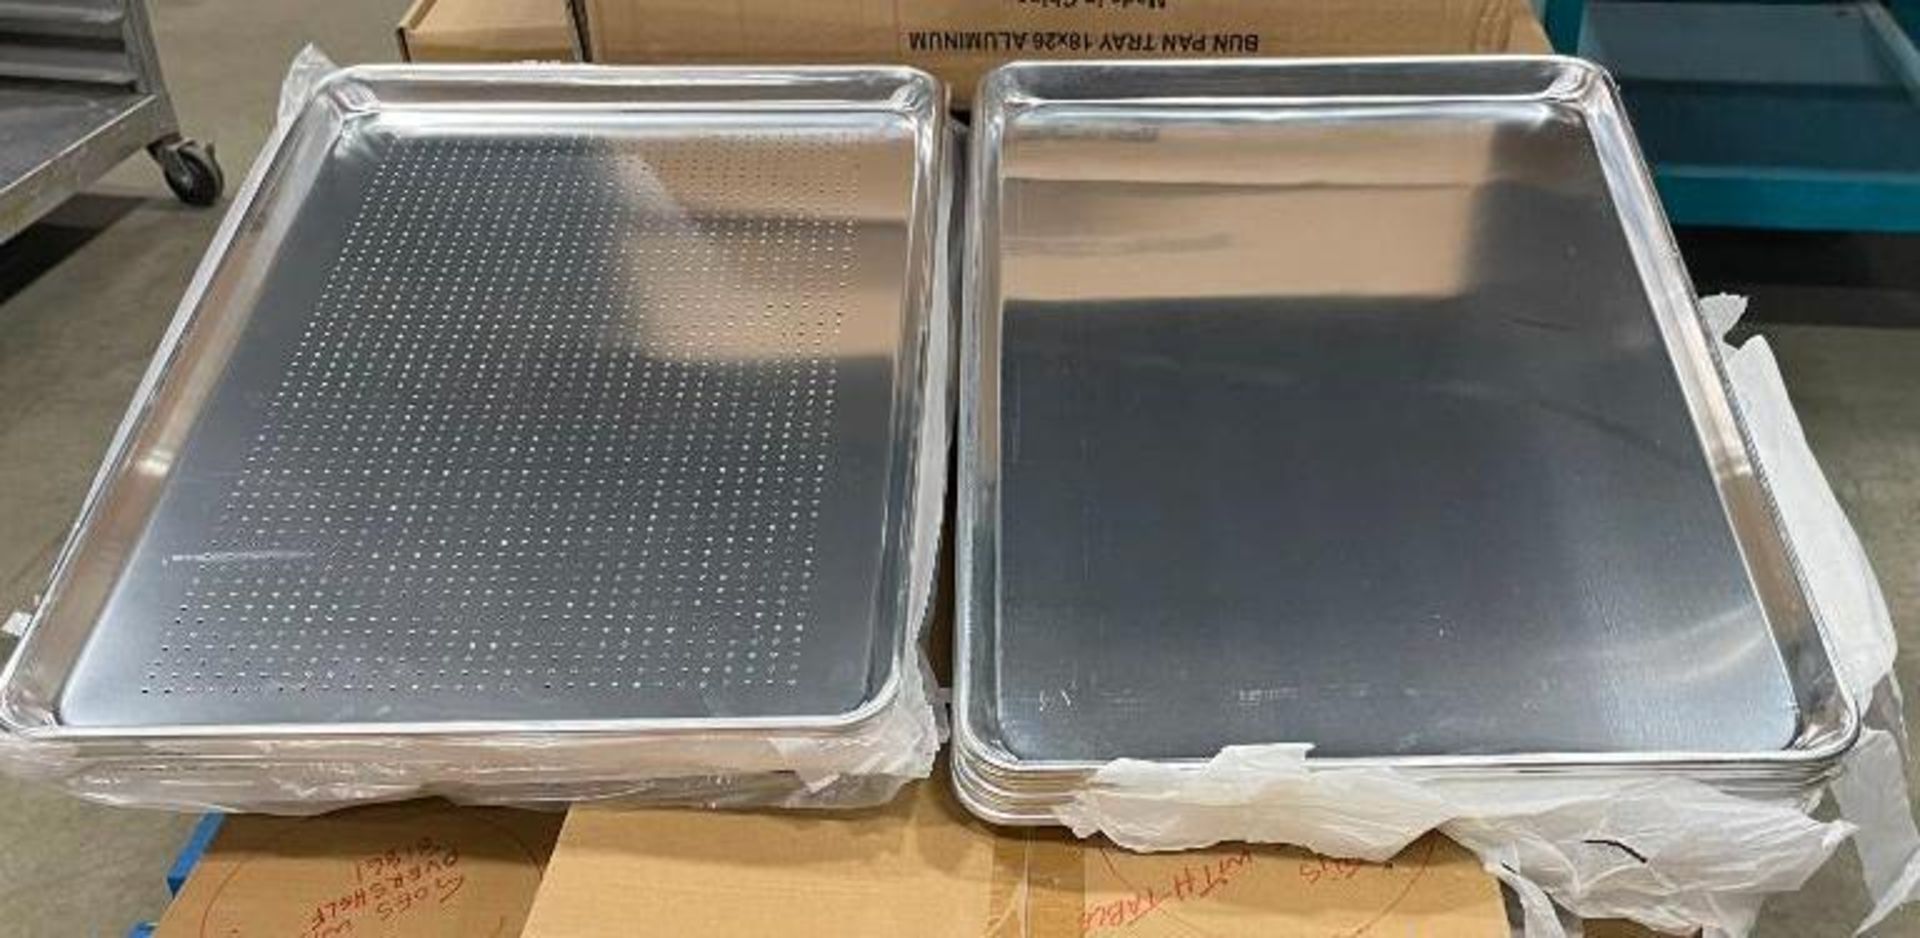 (6) FULL SIZE BUN PANS & (6) FULL SIZE PERFORATED BUN PANS, LOT OF 12. - NEW - Image 3 of 6